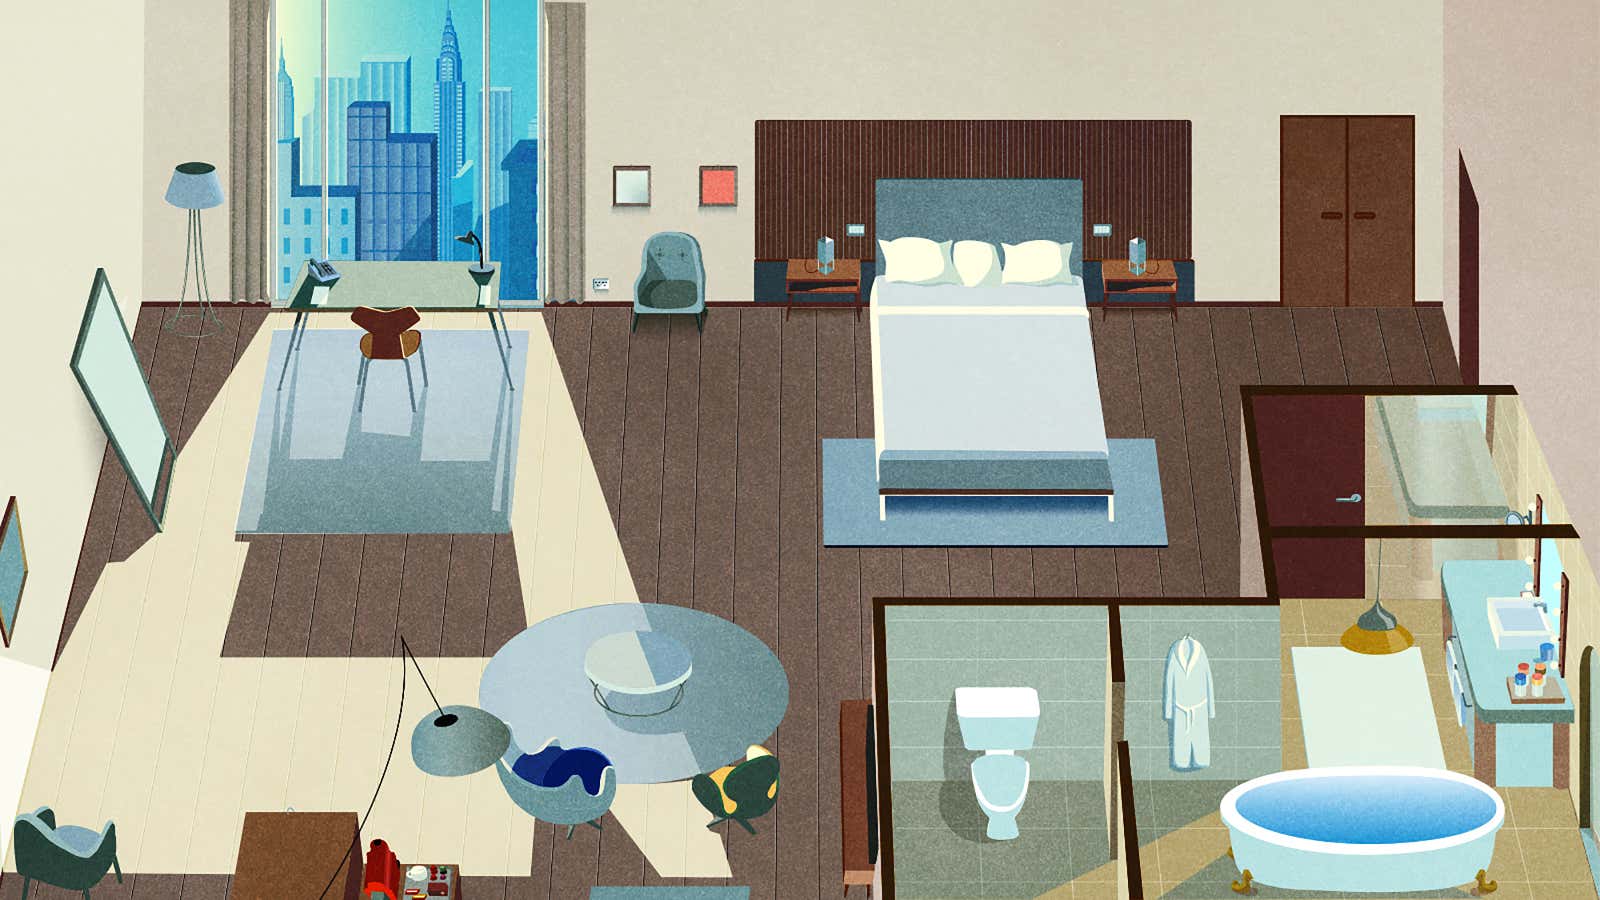 Interactive: Hotels are designed to make you feel good. Here’s how